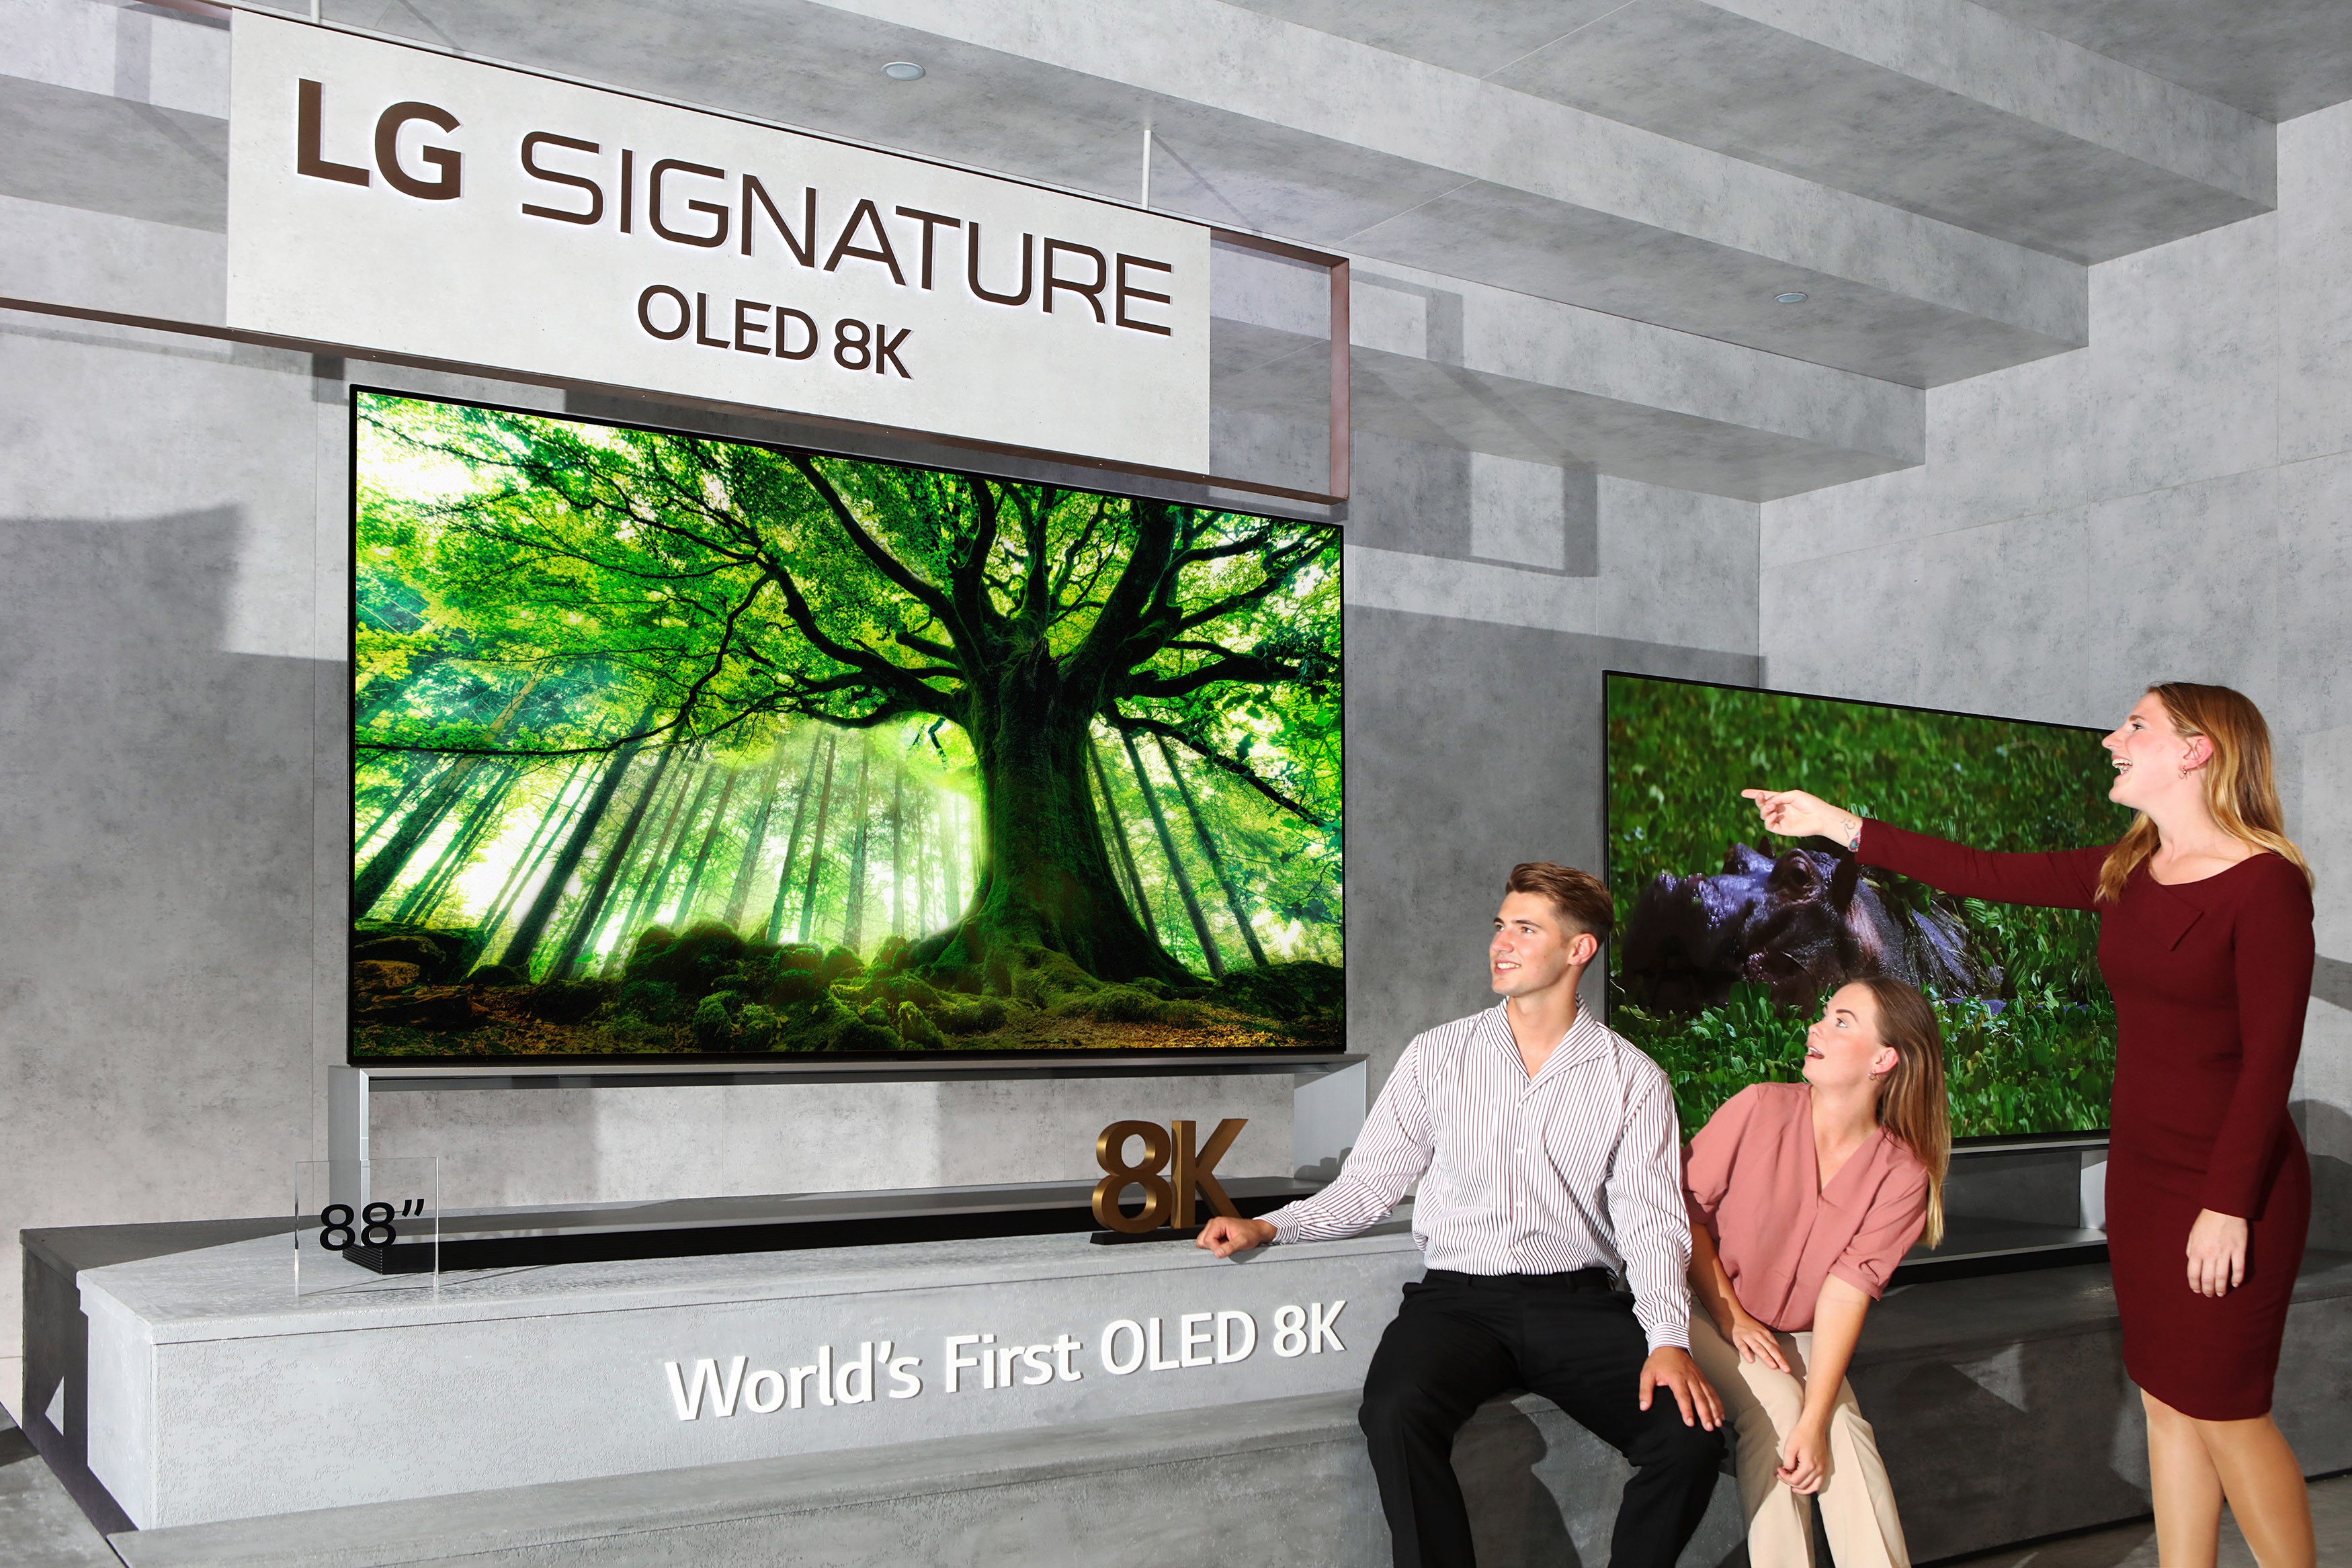 Three models admiring the LG SIGNATURE OLED 8K TV while it displays an enormous tree.